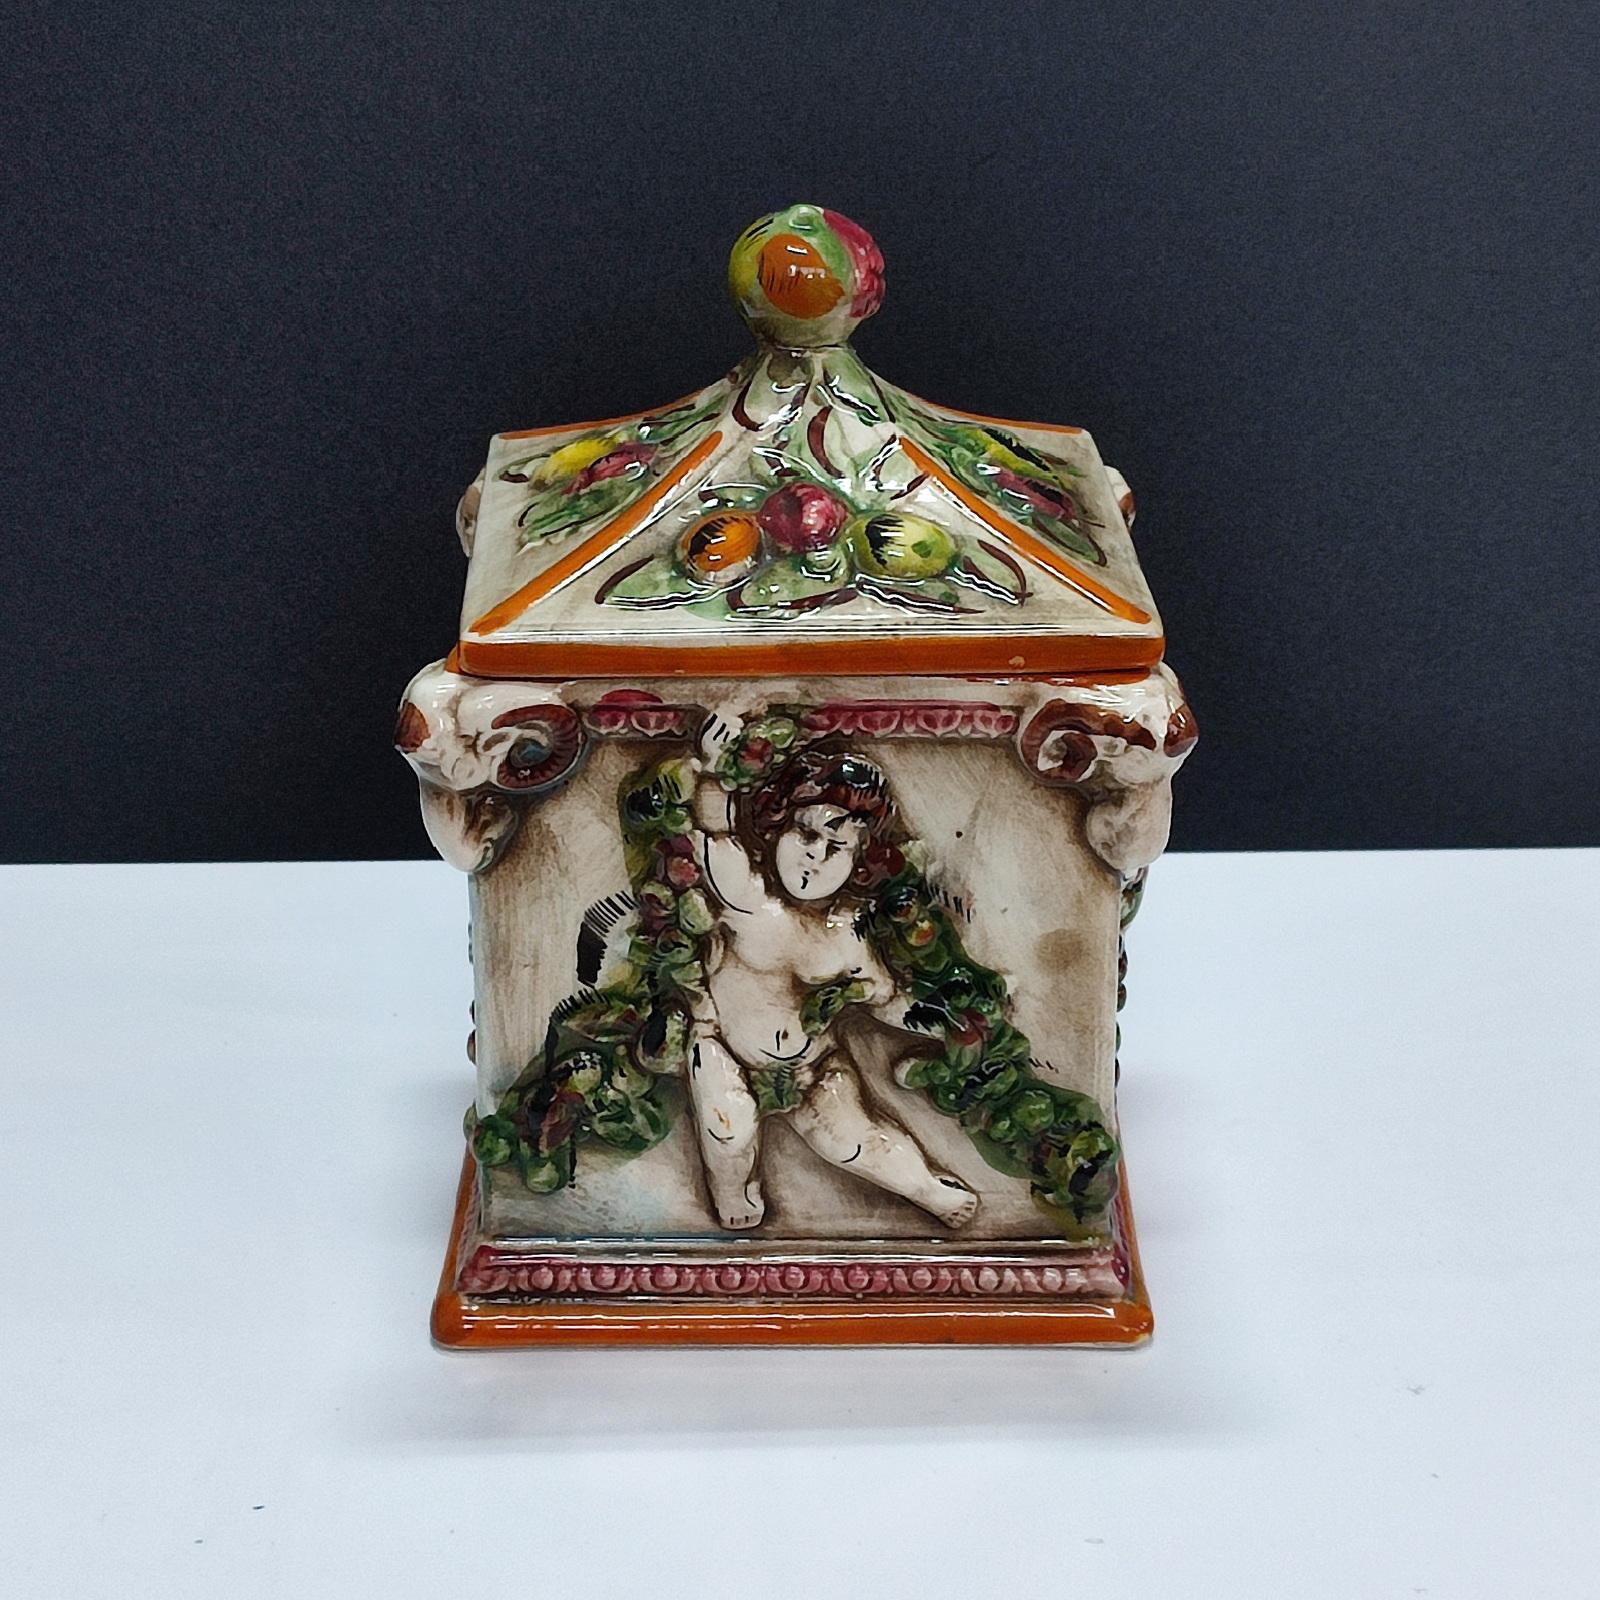 Capodimonte Lidded Jar Four Seasons Cherubs Decor. Vintage Italian biscotti jar from the 1950s, handmade and hand-painted. It is a lovely piece that can also be used to decorate your home. Marked Capdimonte on the bottom.
Good overall condition, it